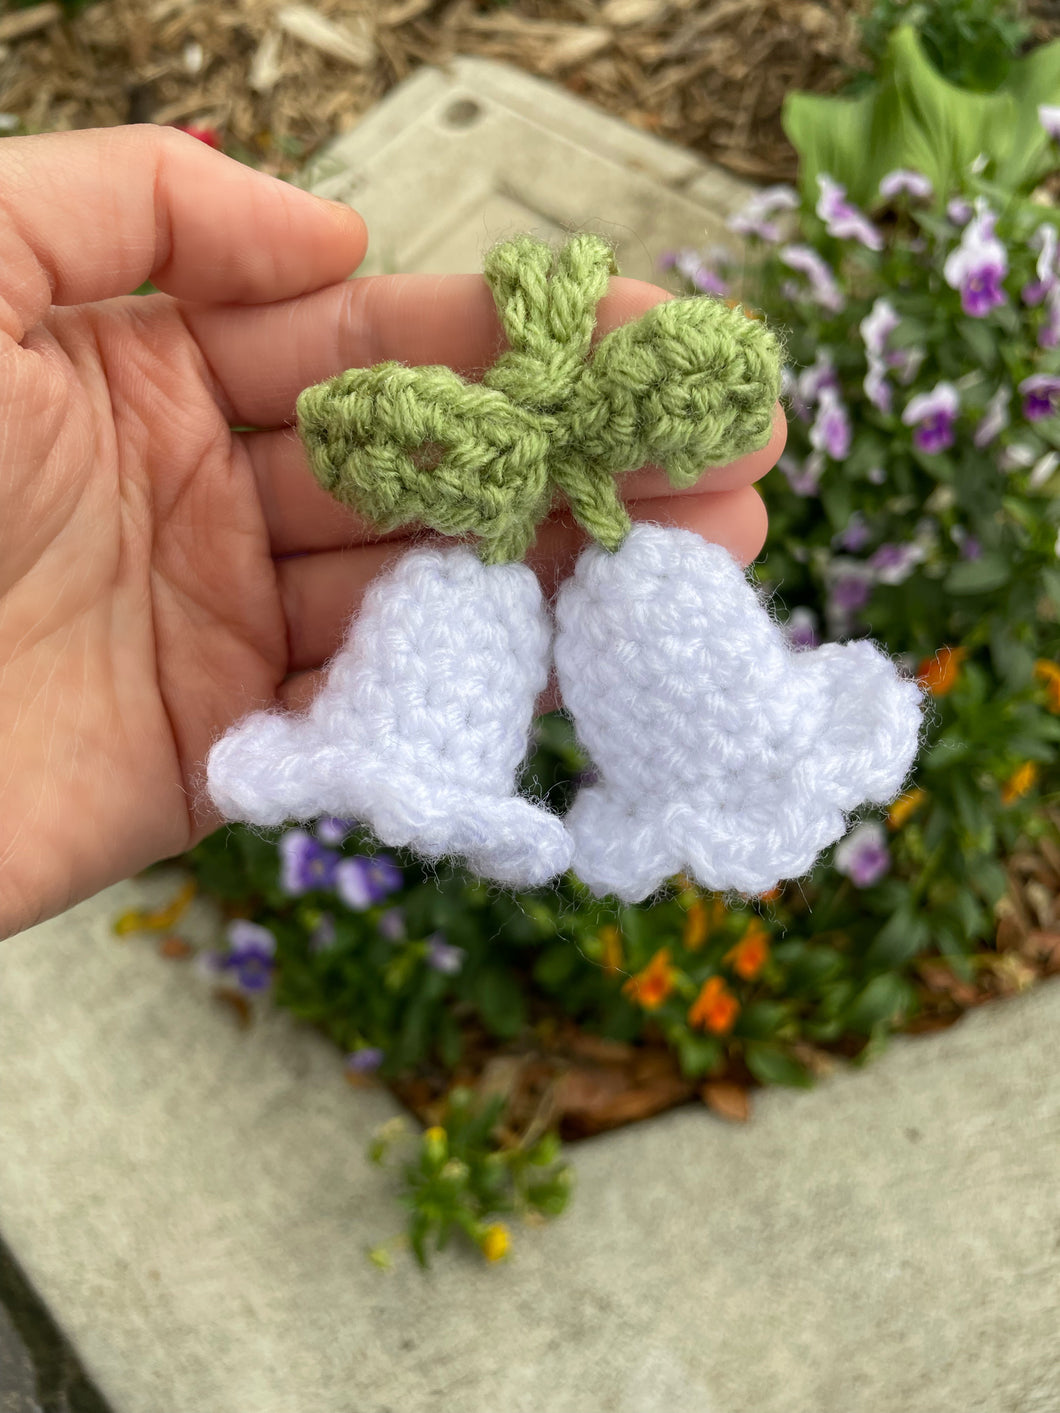 Lily of the Valley Keychain